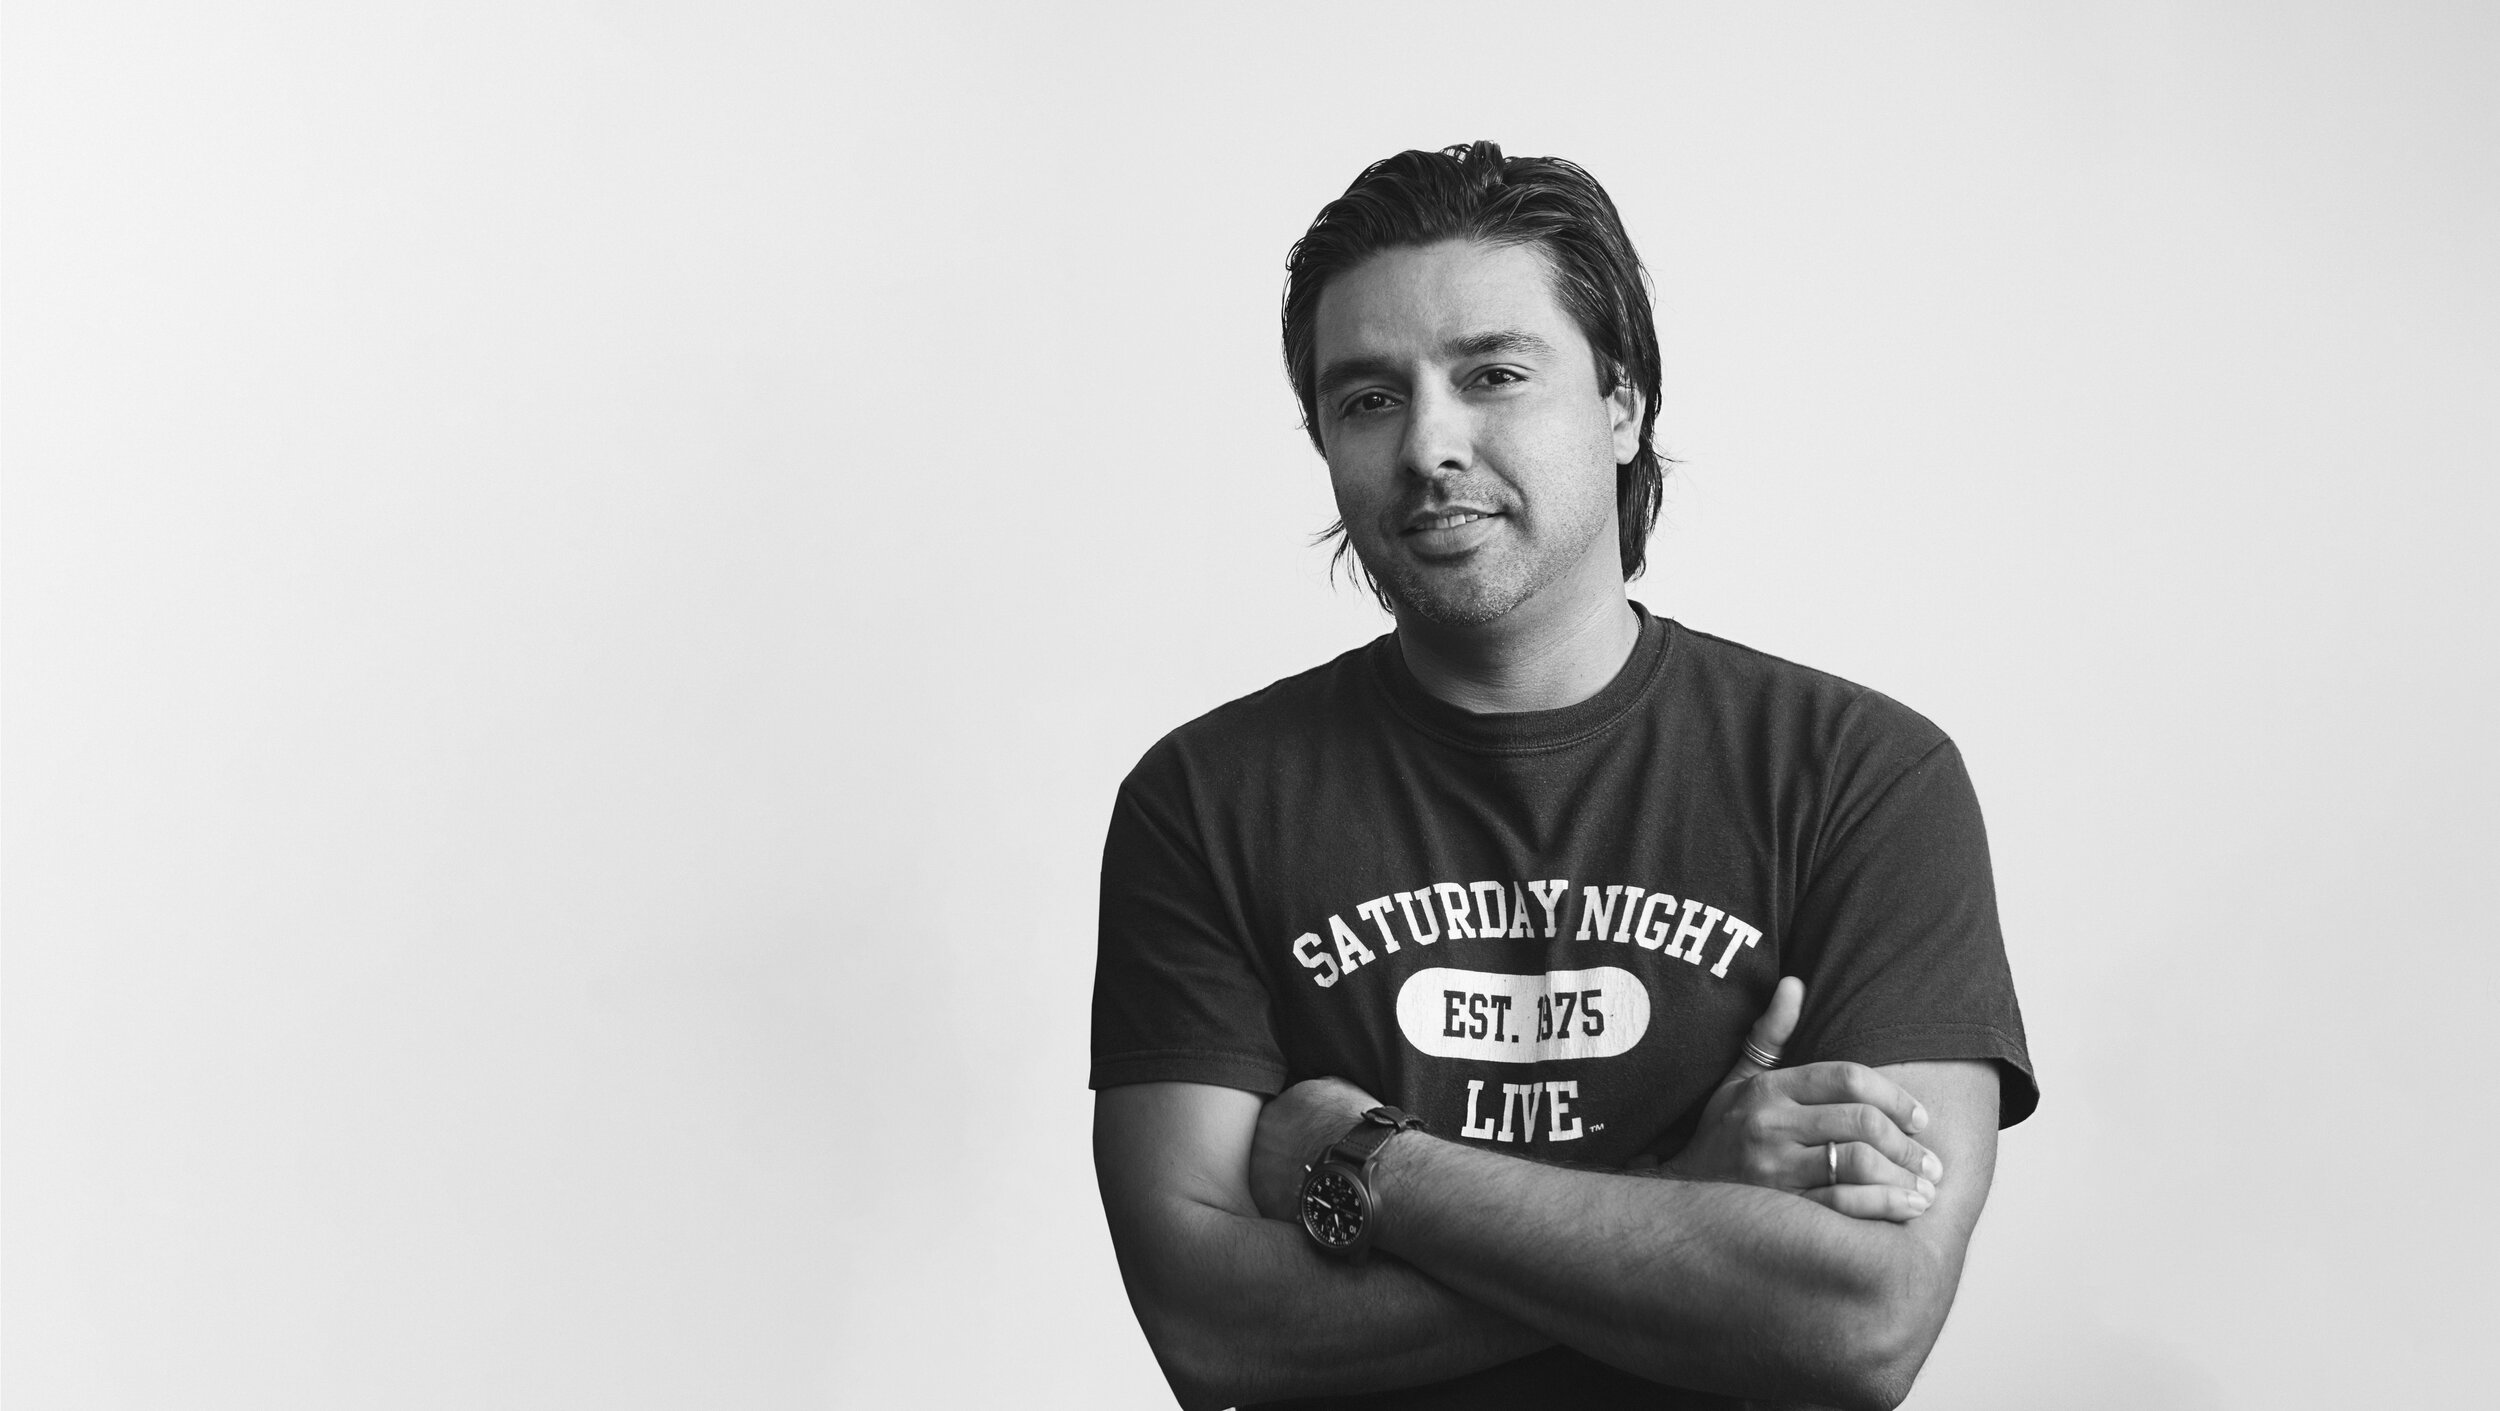 LevLane Advertising appoints award-winning Chris Moreira as Chief Creative Officer